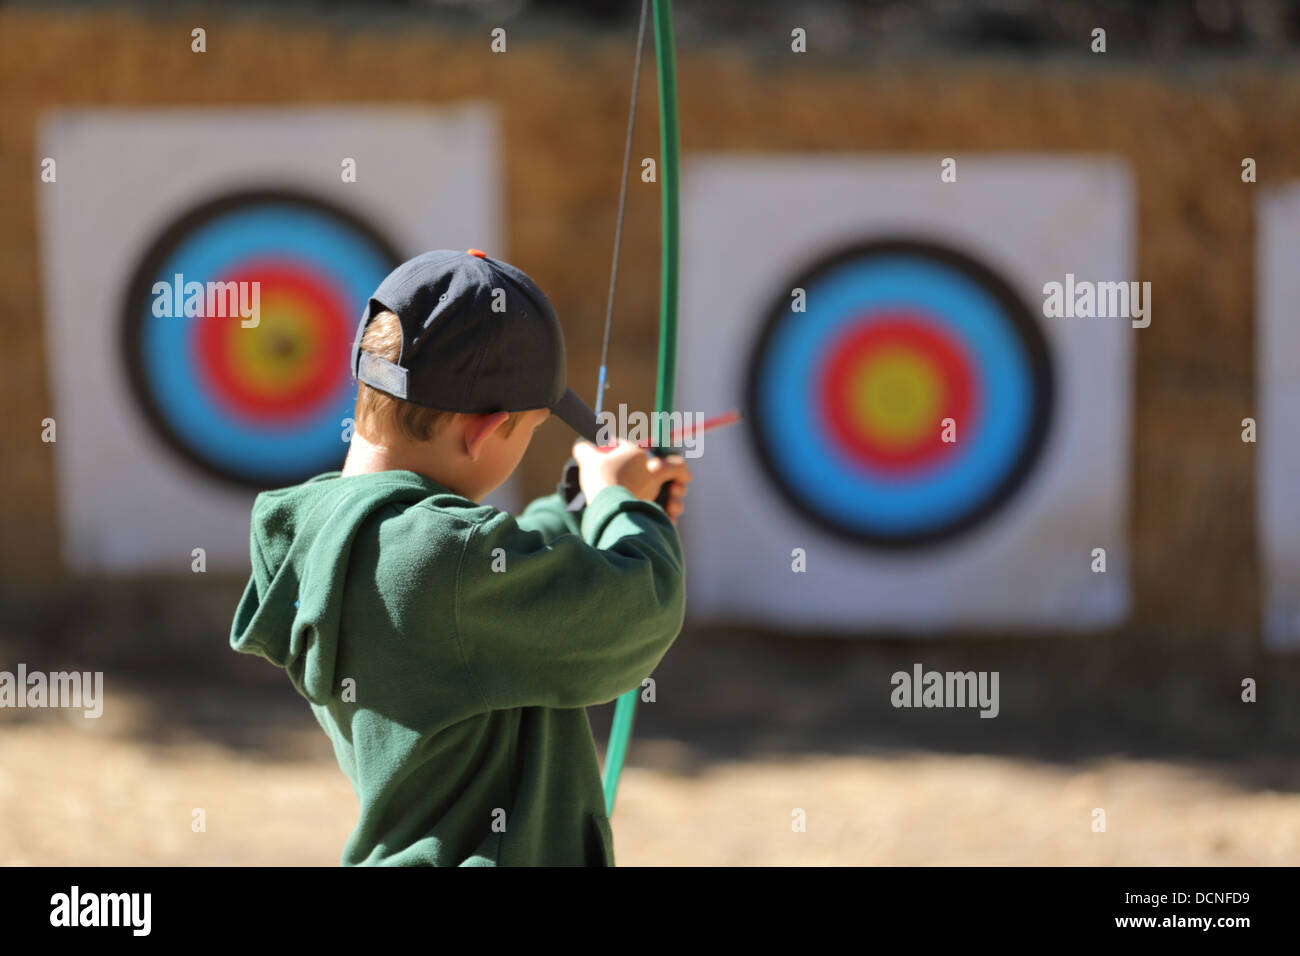 Young boy pointing arrow at target Stock Photo